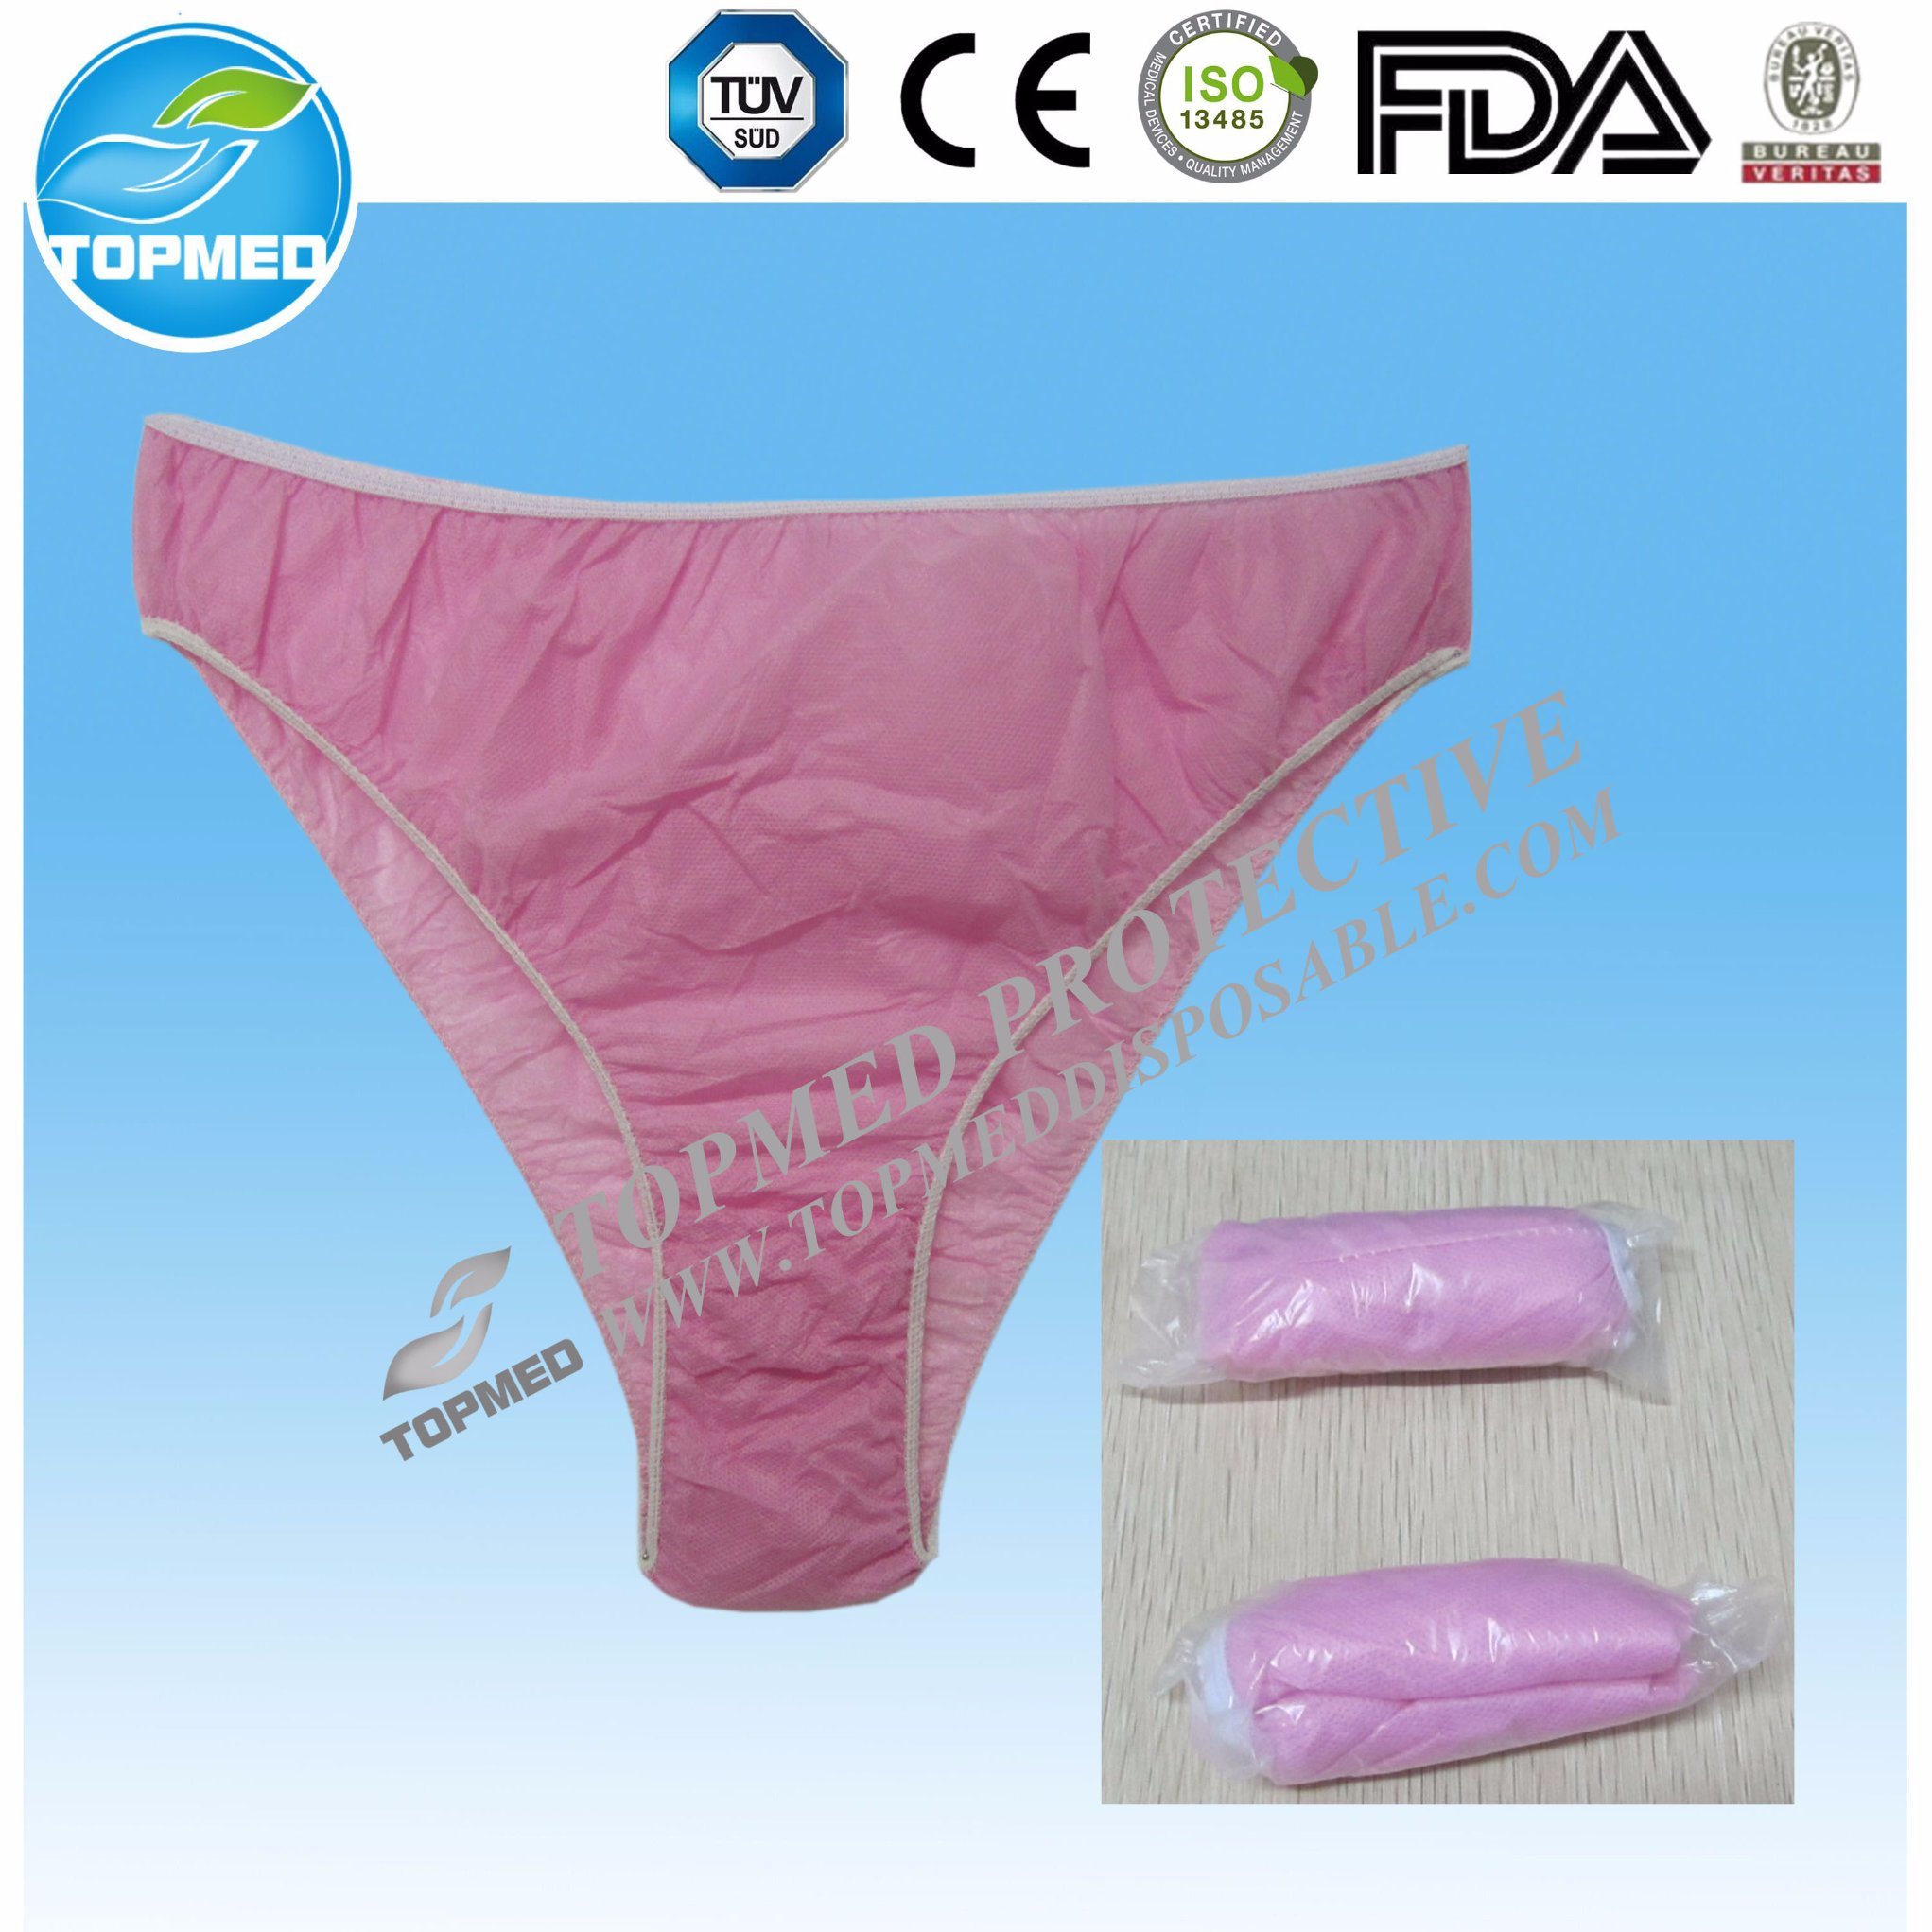 100% Cotton Underwear for Travel One Time Use